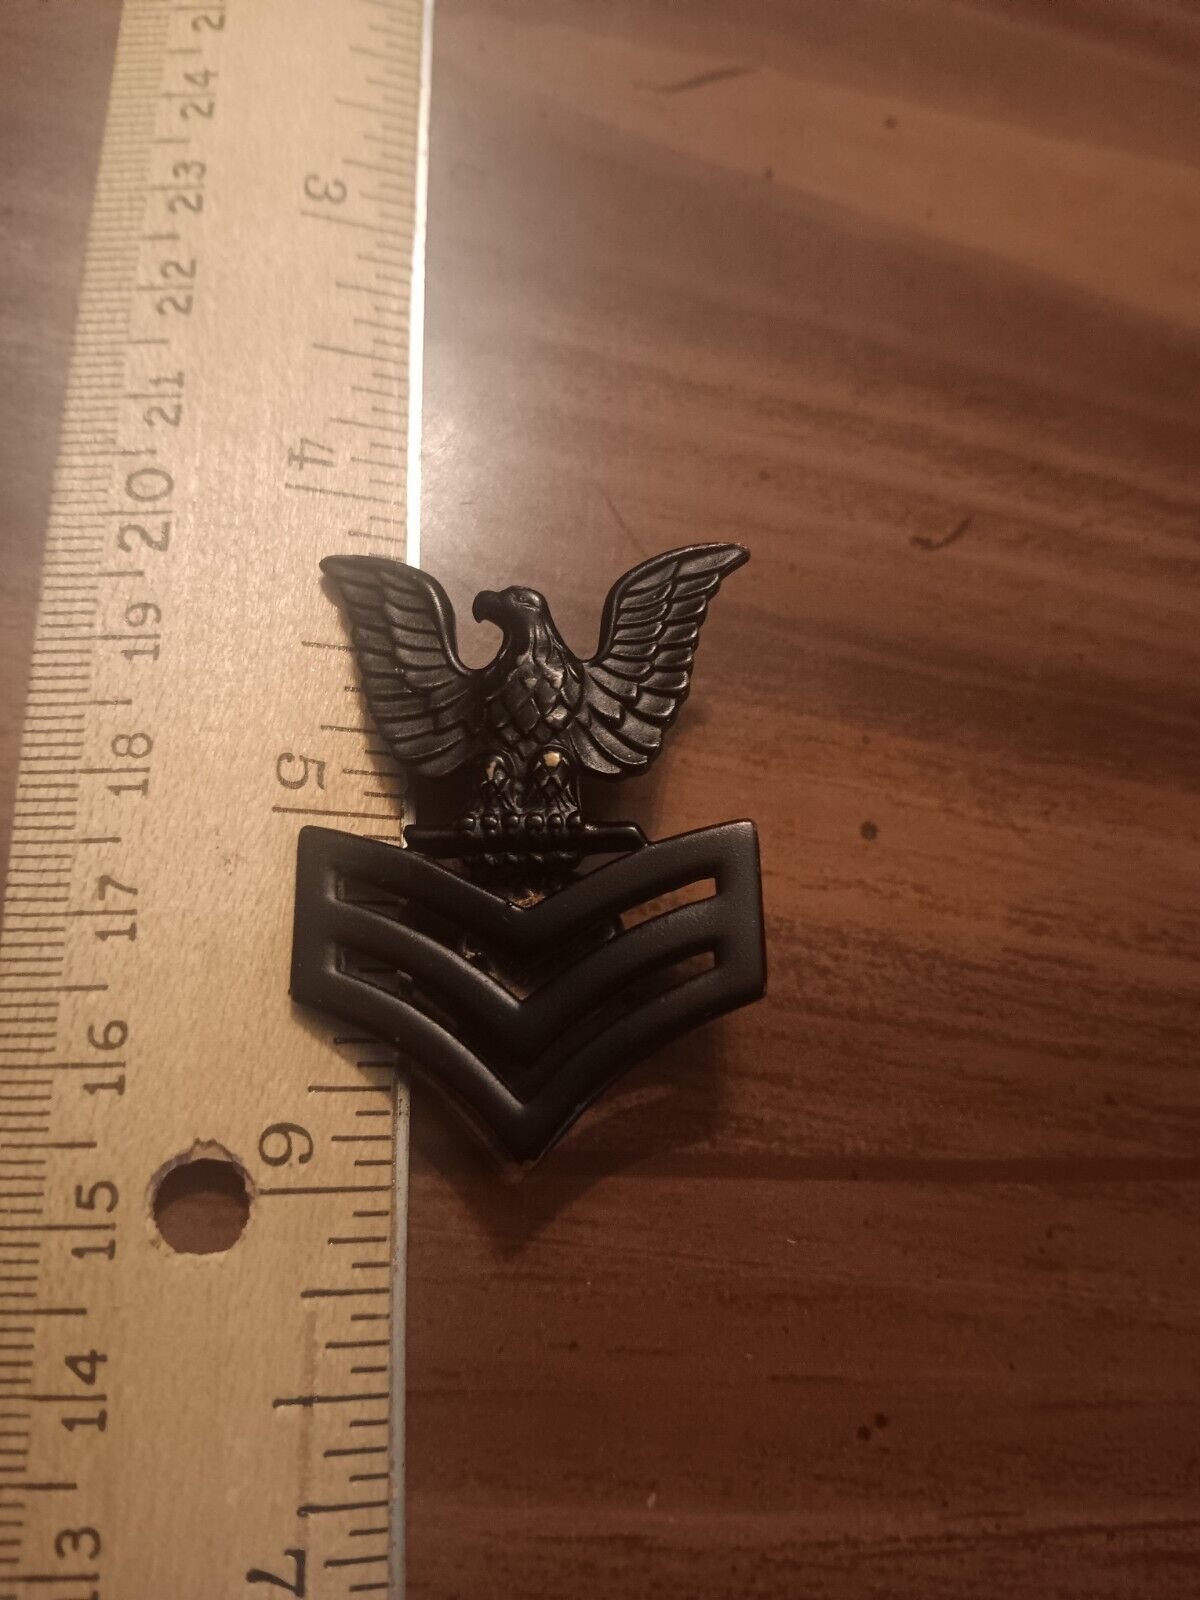 US Navy Large Single Black Metal Rank Pin- PO1 Petty Officer First Class (24-998